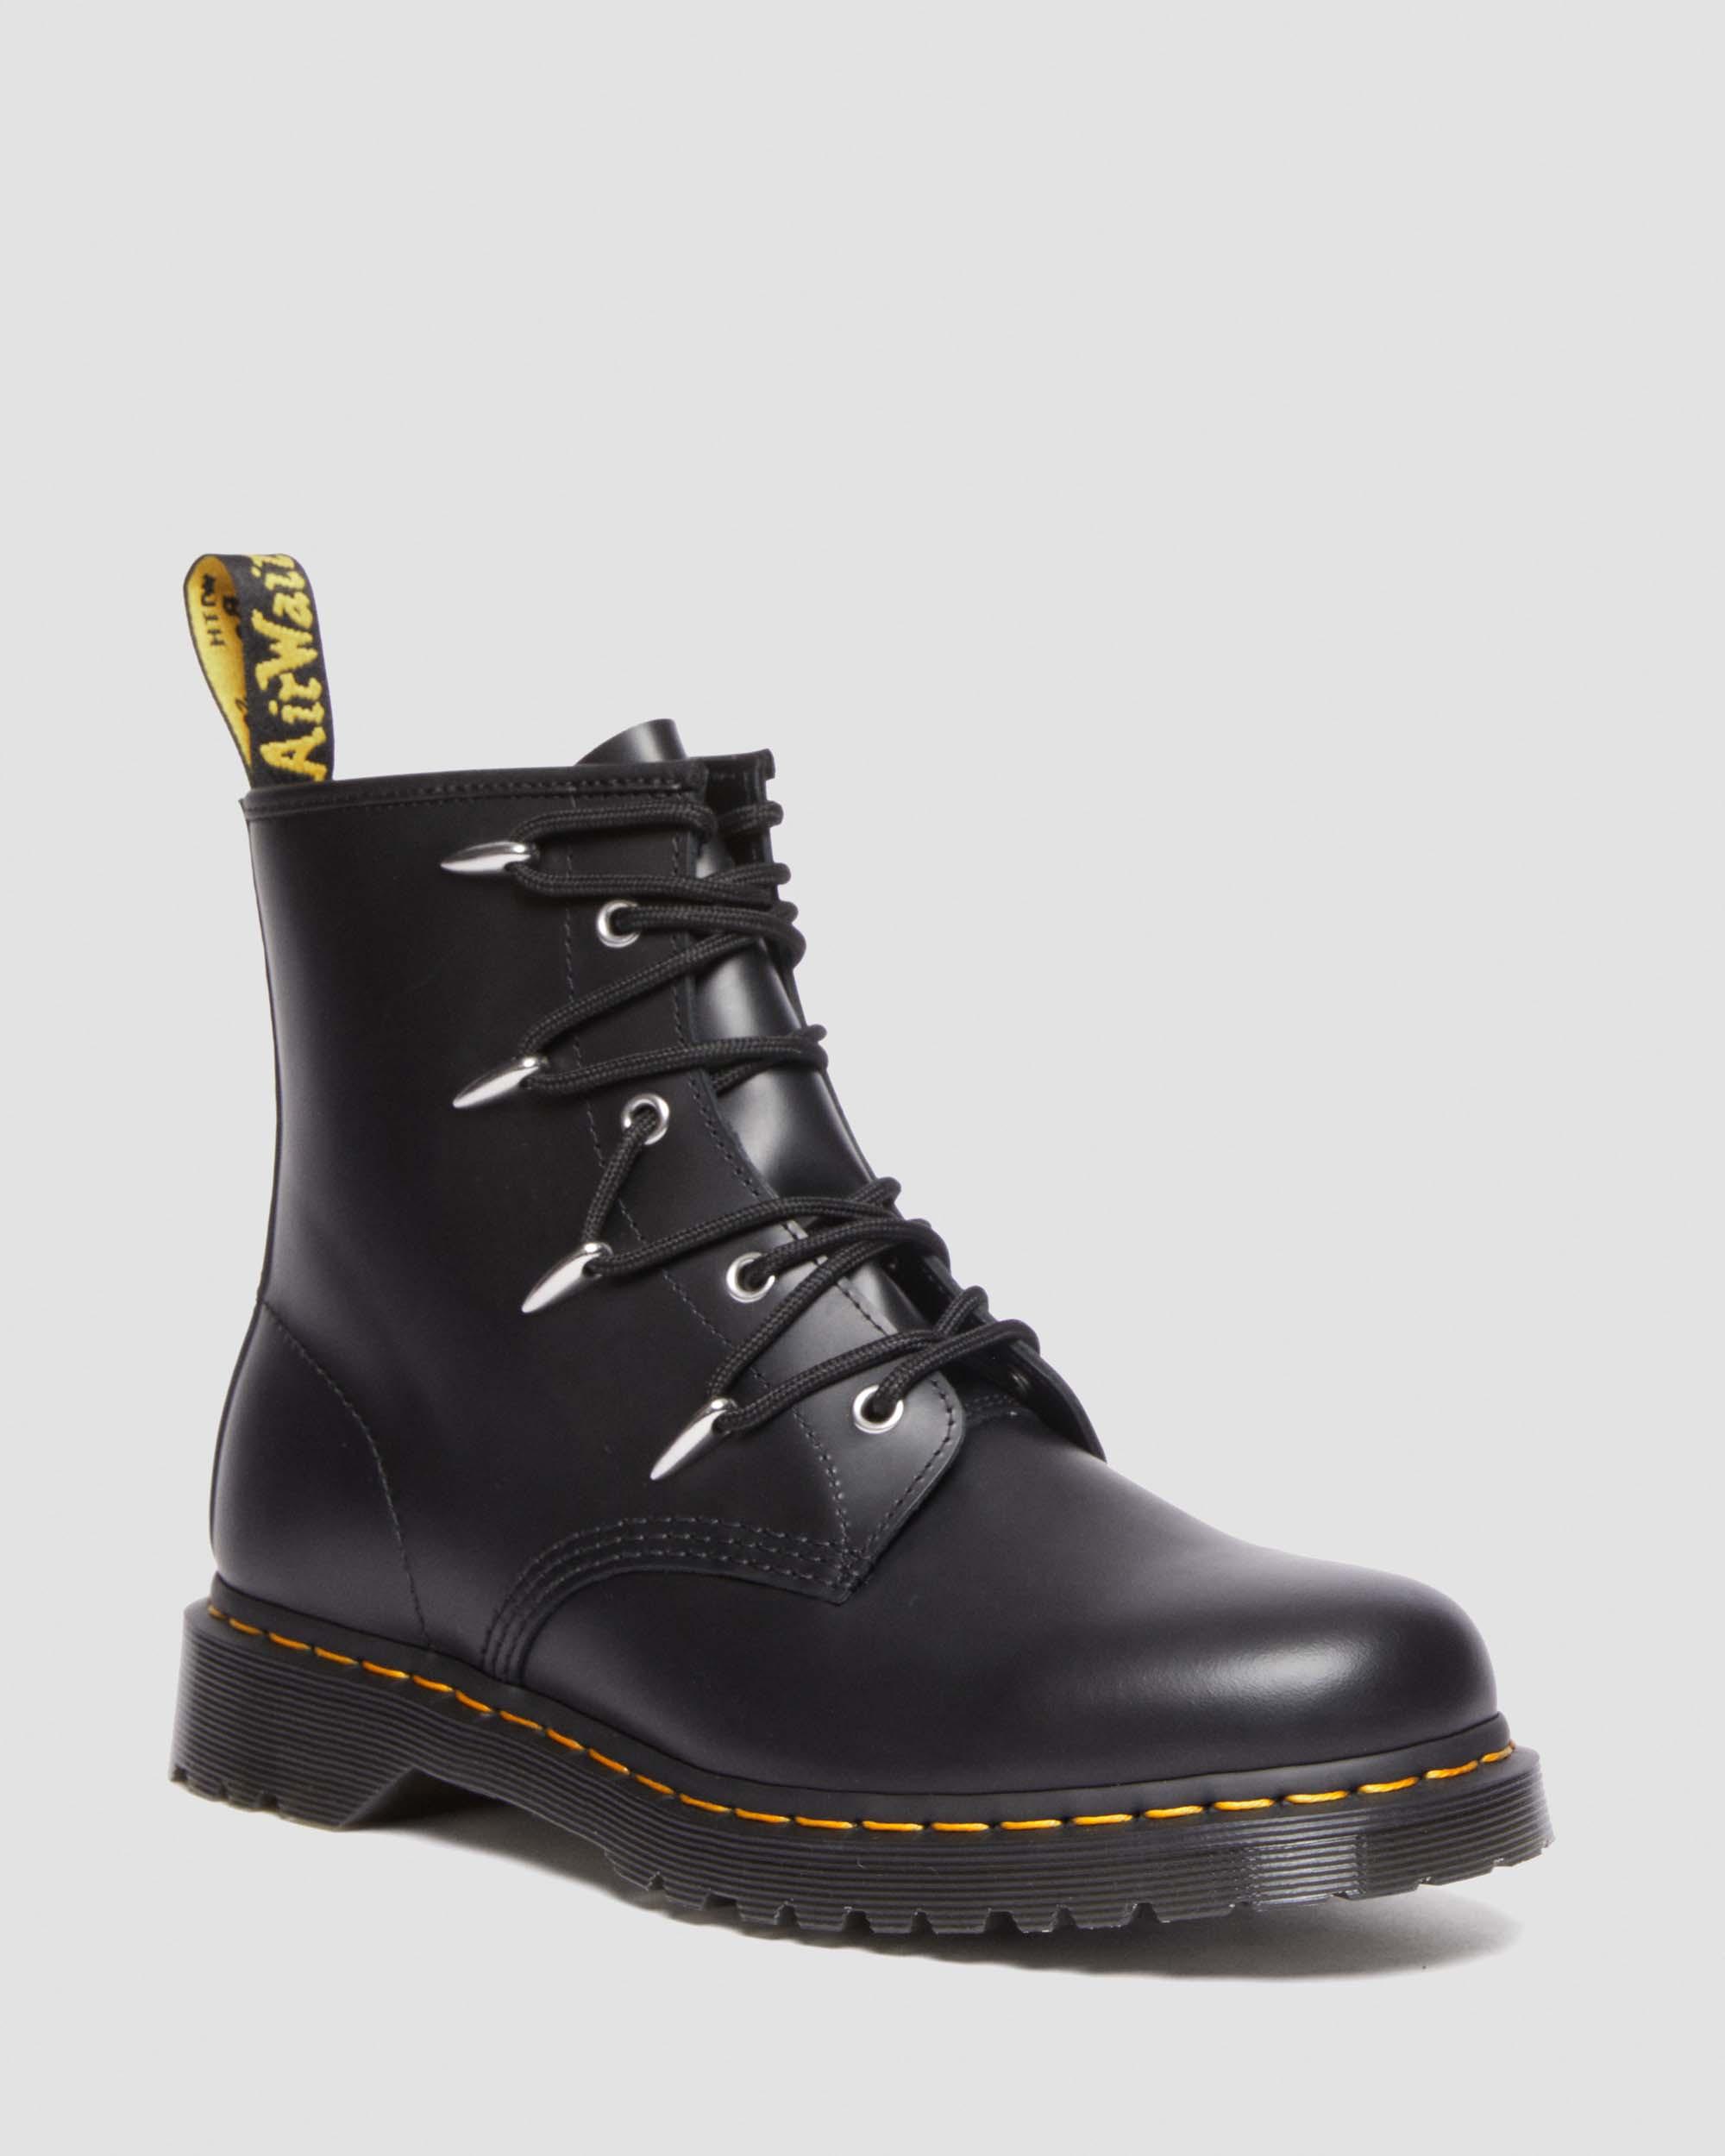 1460 Alien Hardware Leather Lace Up Boots in BLACK